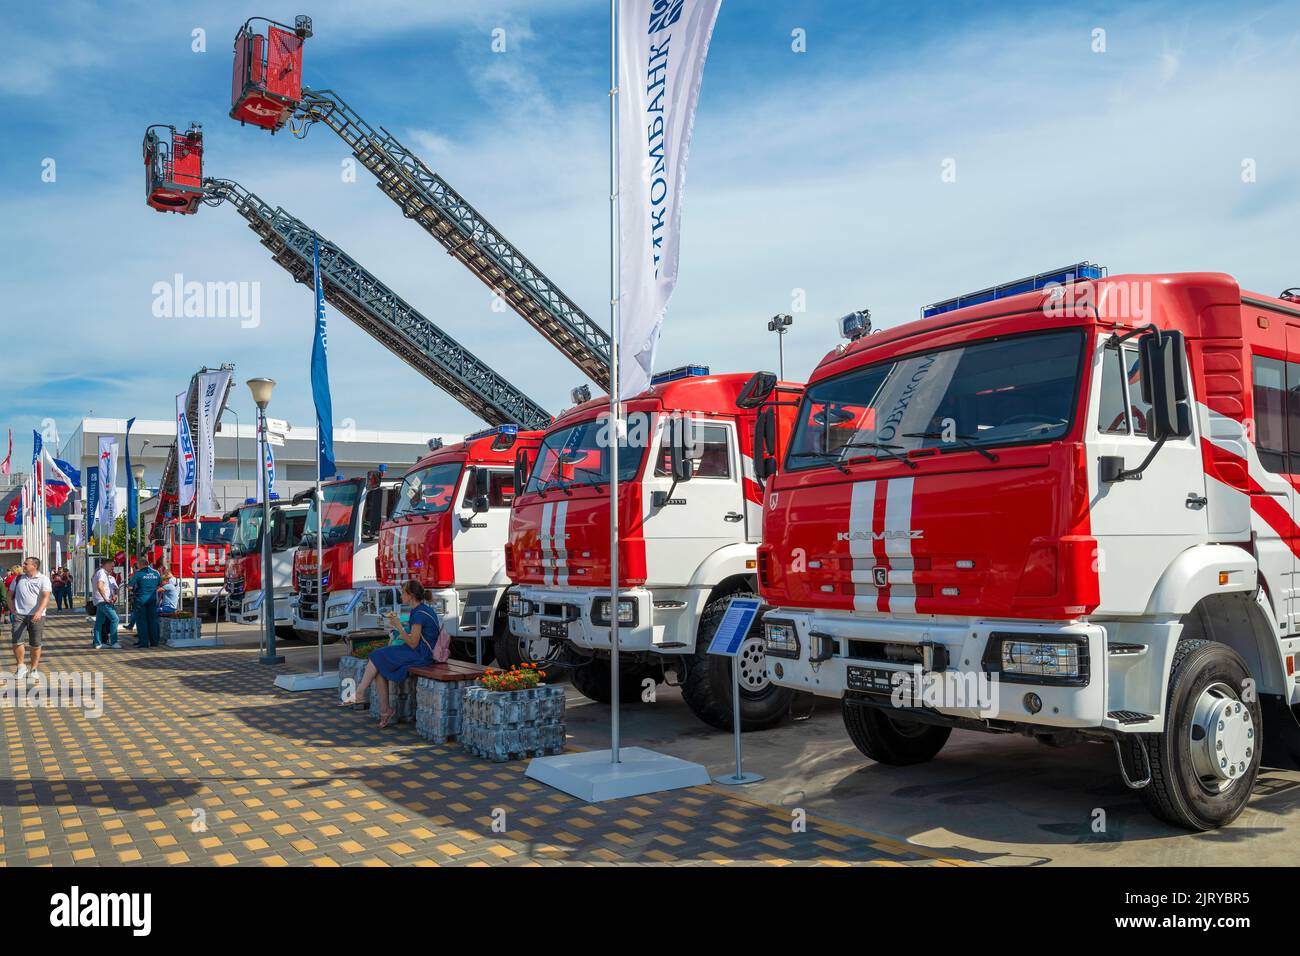 MOSCOW REGION, RUSSIA - AUGUST 19, 2022: Modern Russian fire trucks in the exposition of the international military-technical forum of 'Army-2022' Stock Photo